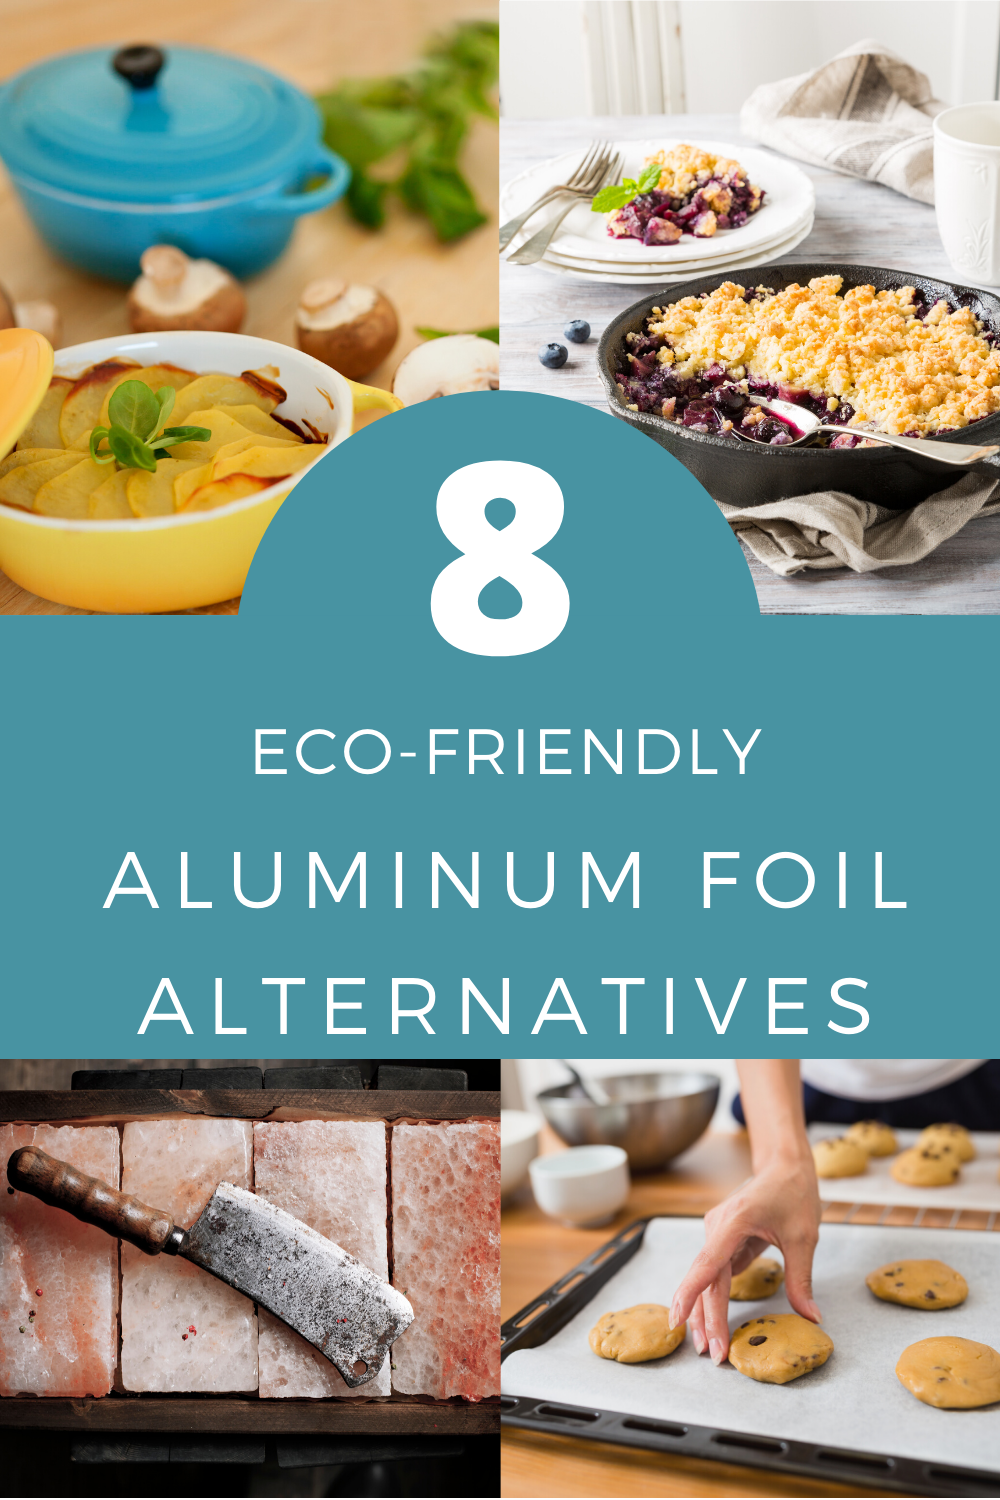 Eco-Friendly Aluminum Foil Alternatives. From cast irons, to salt slabs and silicone baking sheets, you will not need harmful aluminum foil in your kitchen any longer.